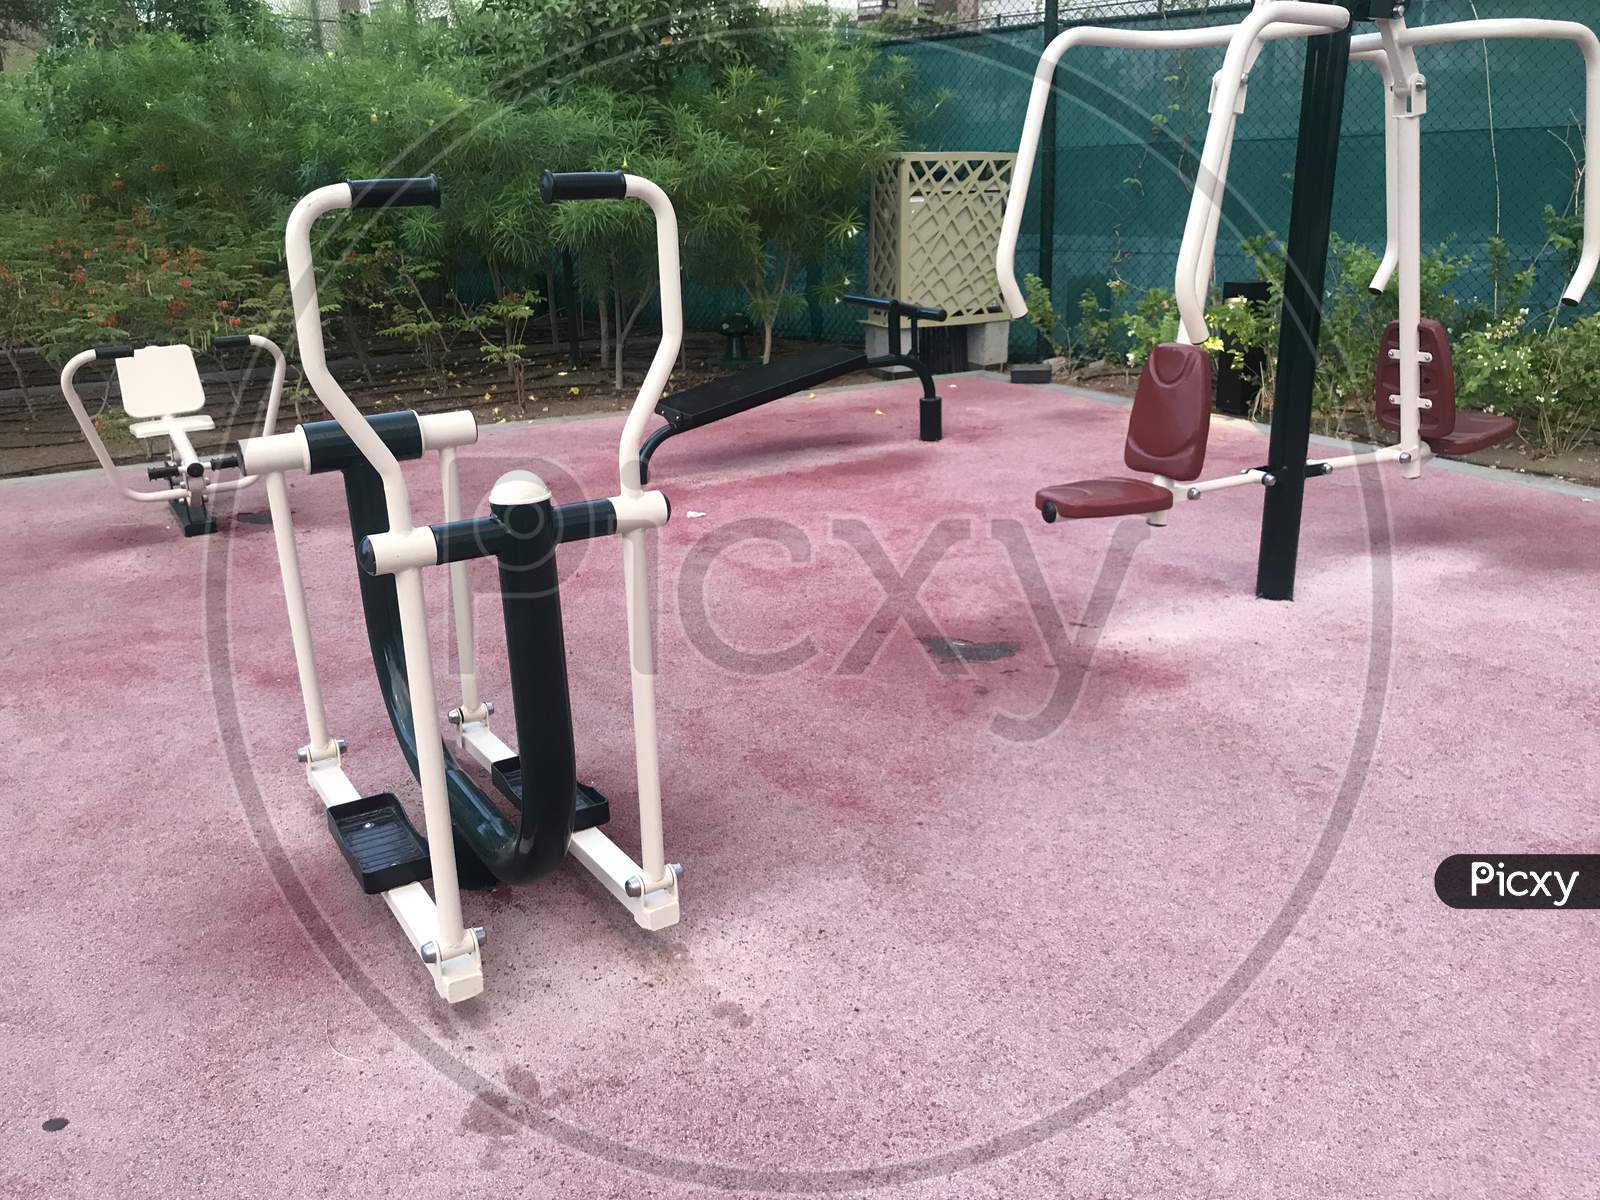 Manual Gym Equipment Fixed Around Rubber Flooring For Physical Workout And Exercise To Keep Healthy Body